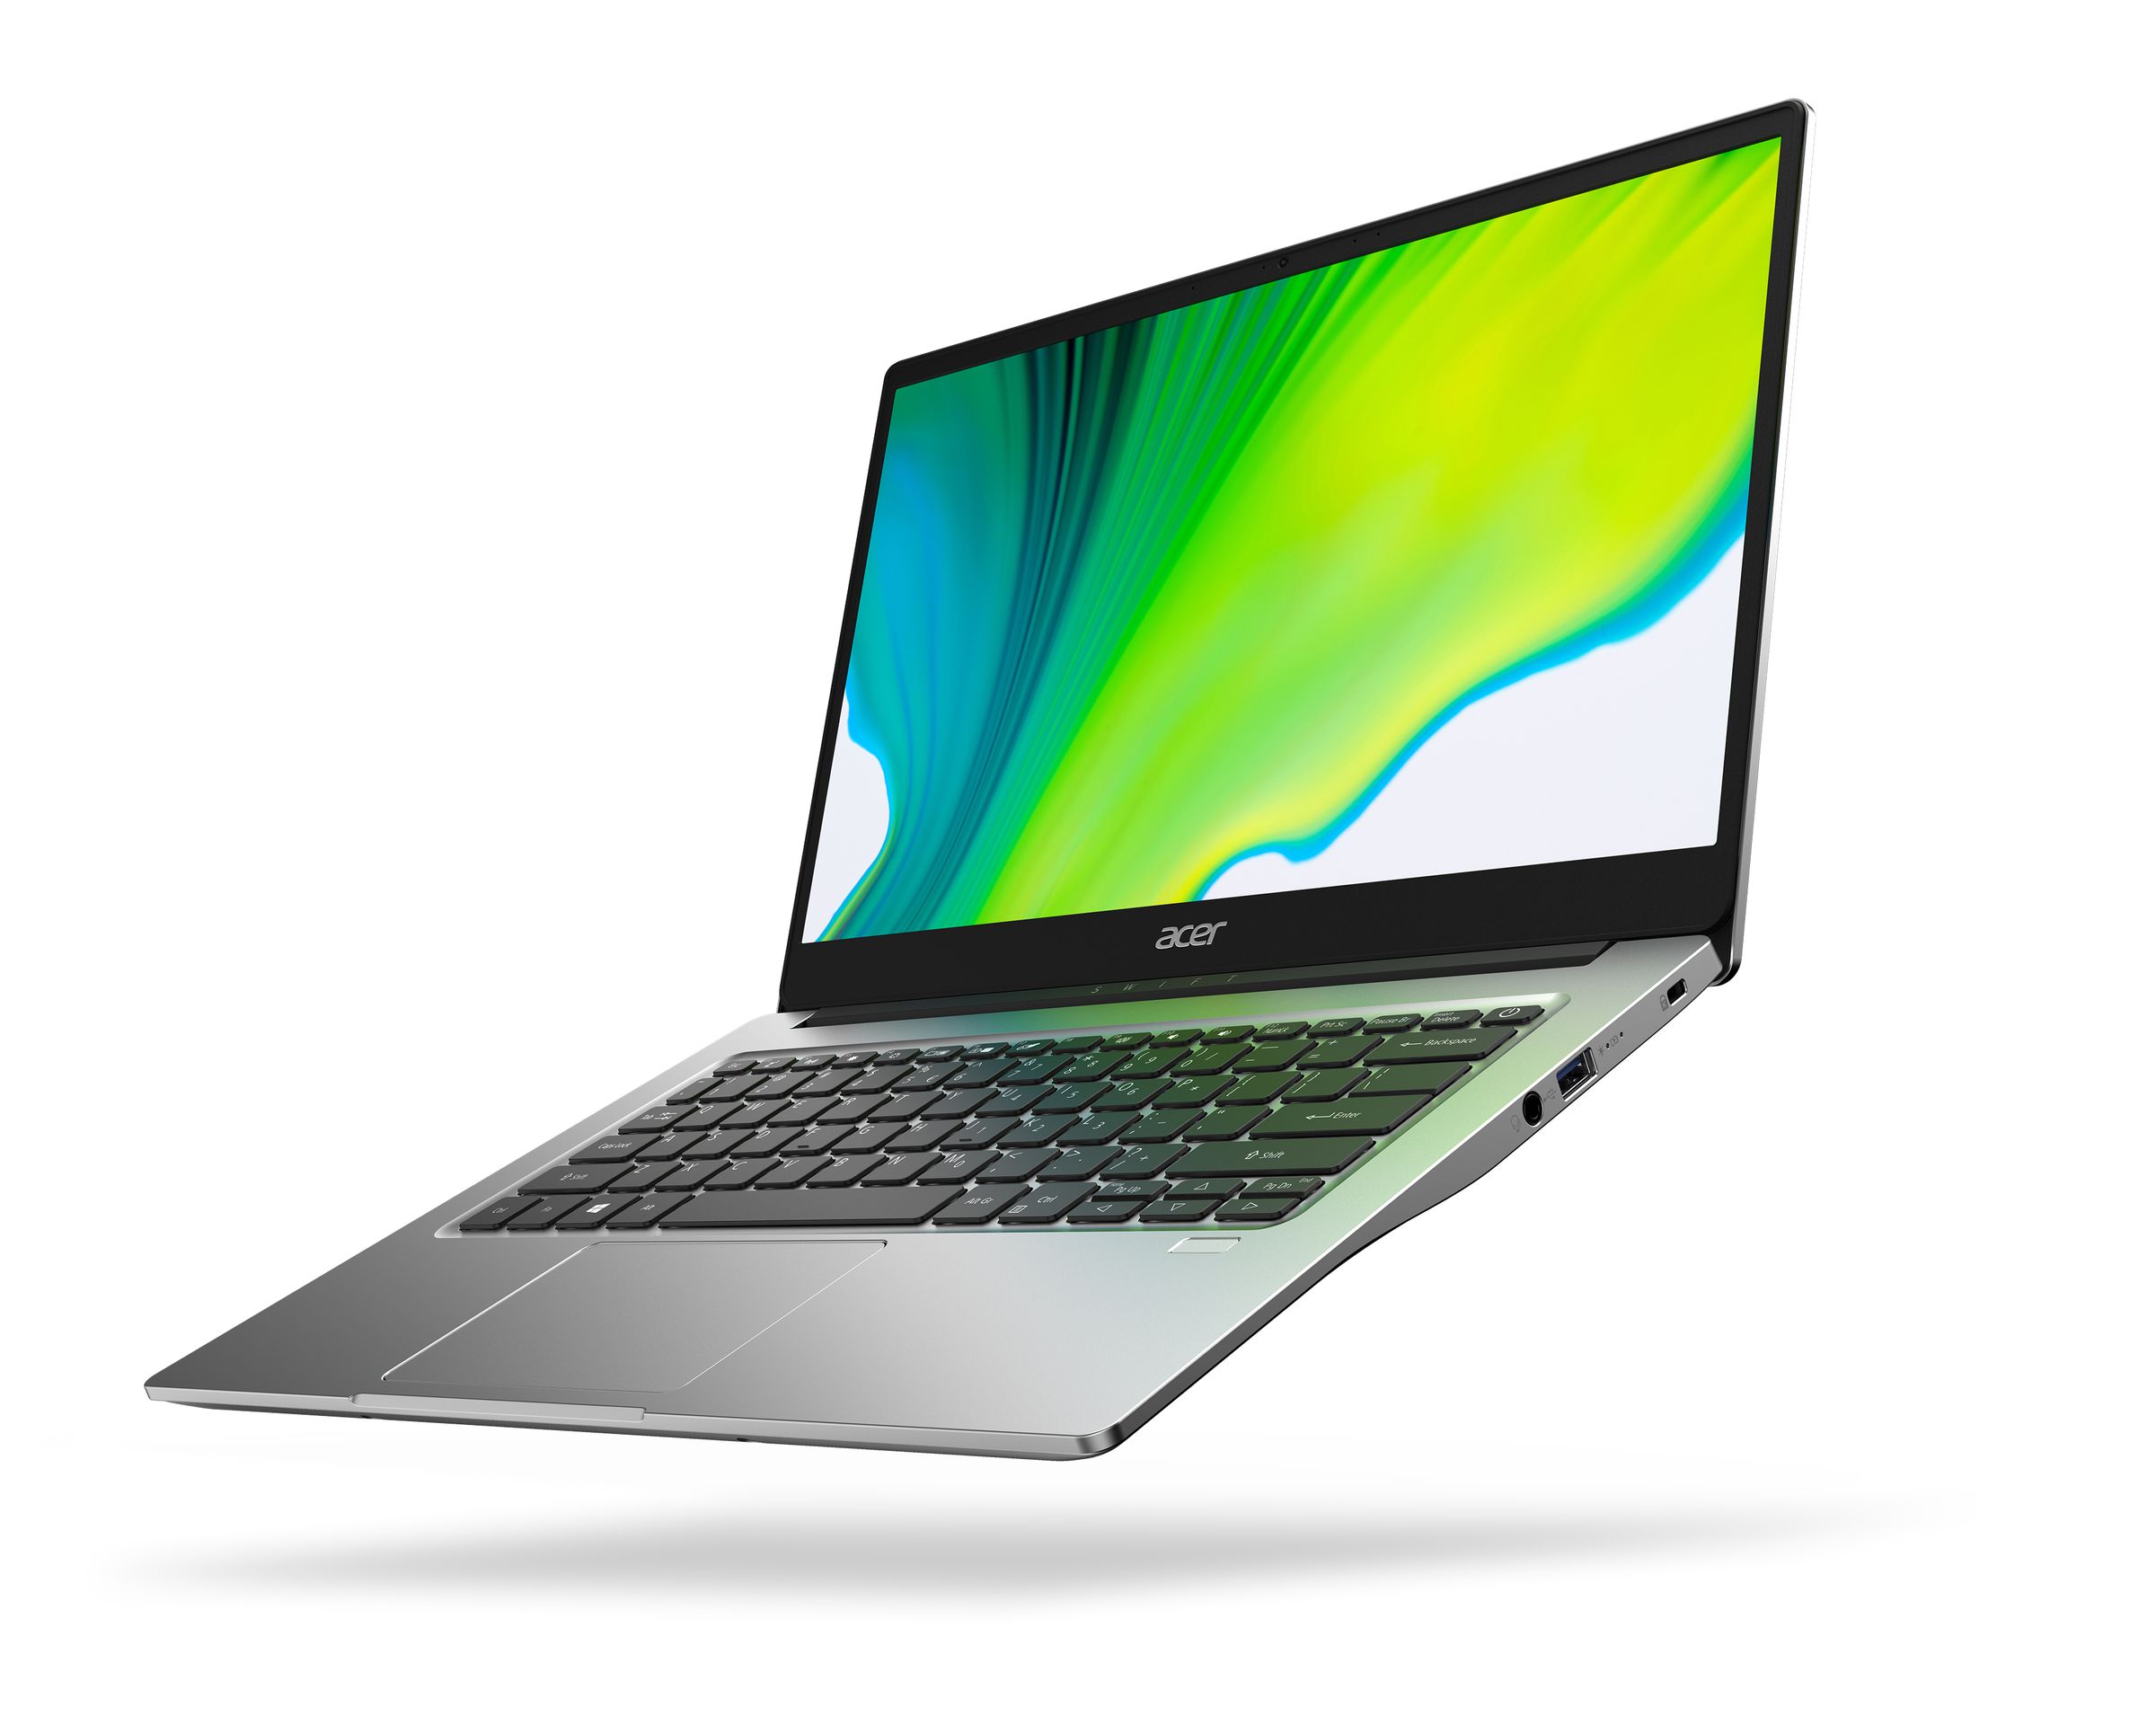 AMD variant of the Acer Swift 3.